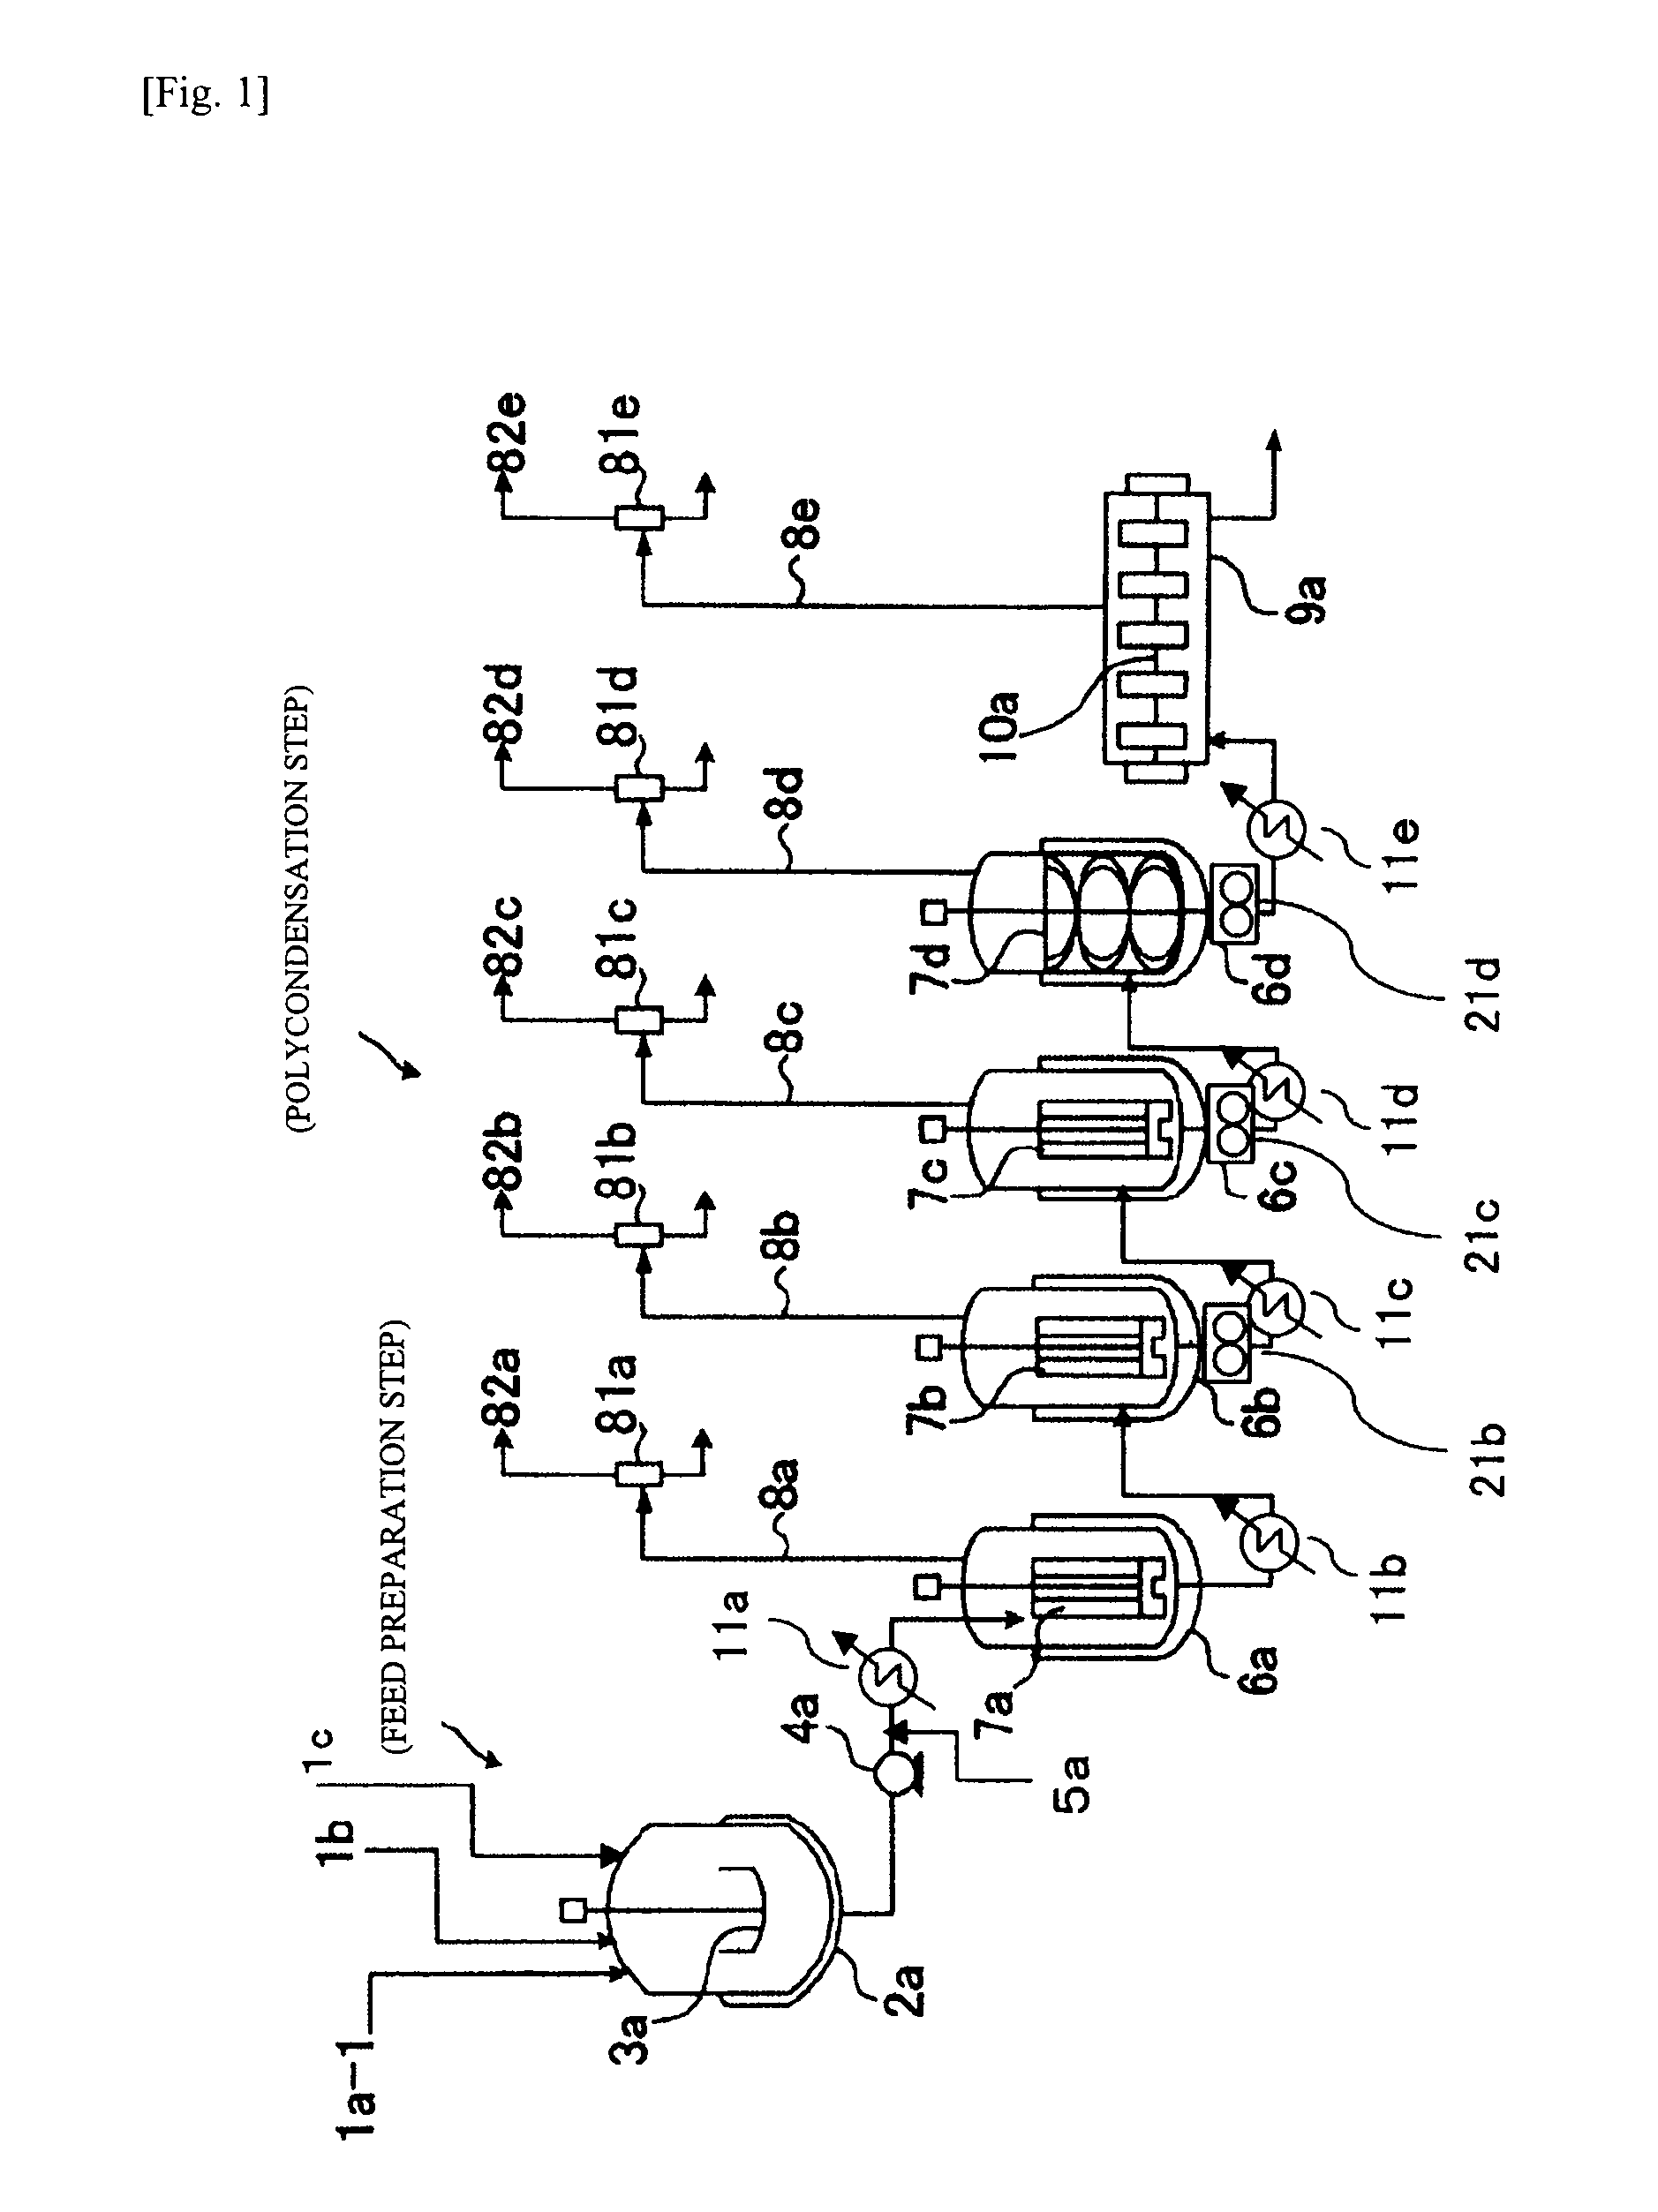 Process for producing polycarbonate